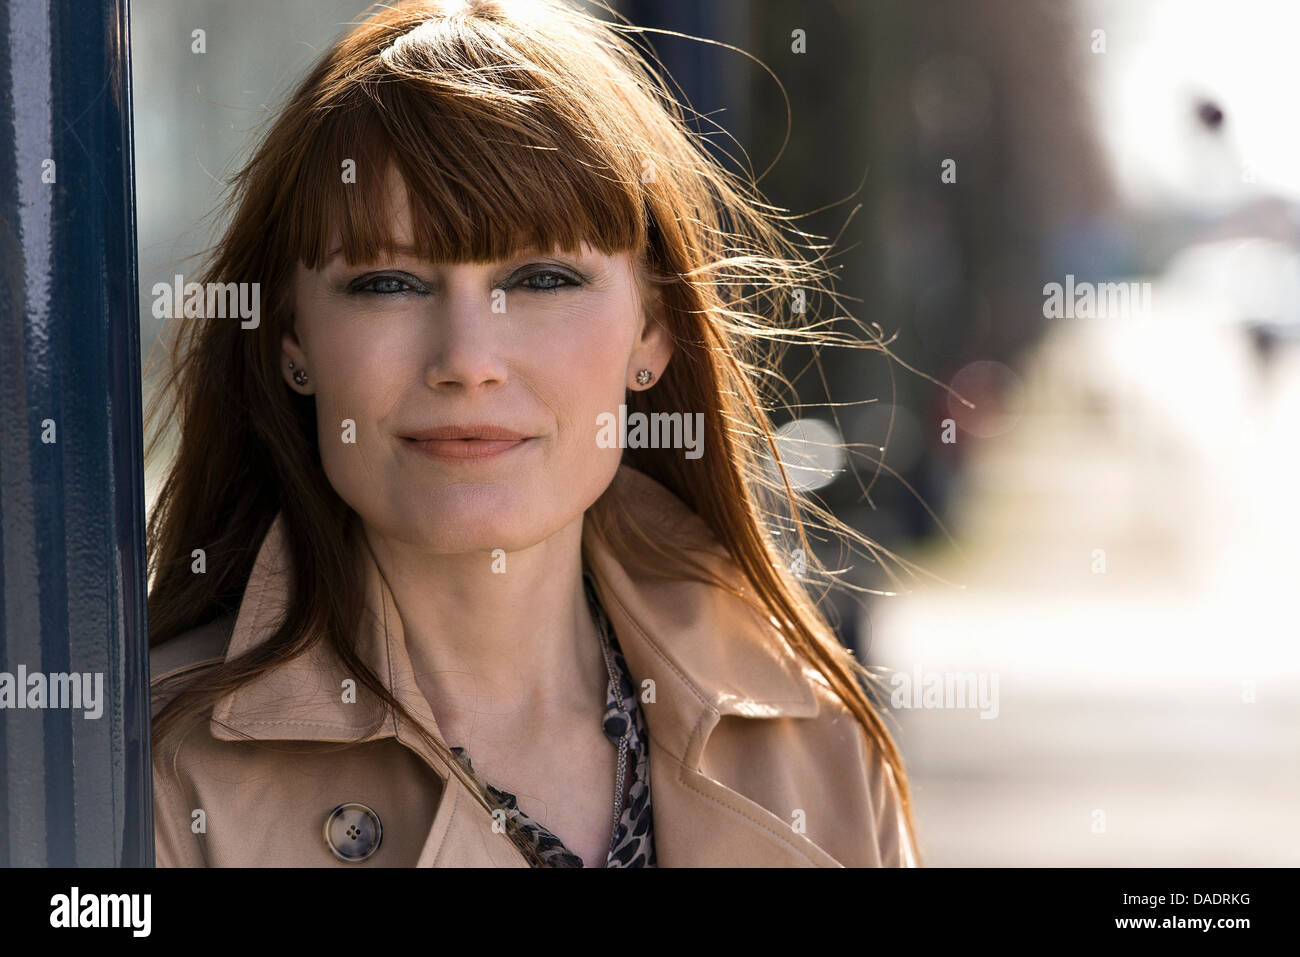 Close up portrait of woman in street Stock Photo